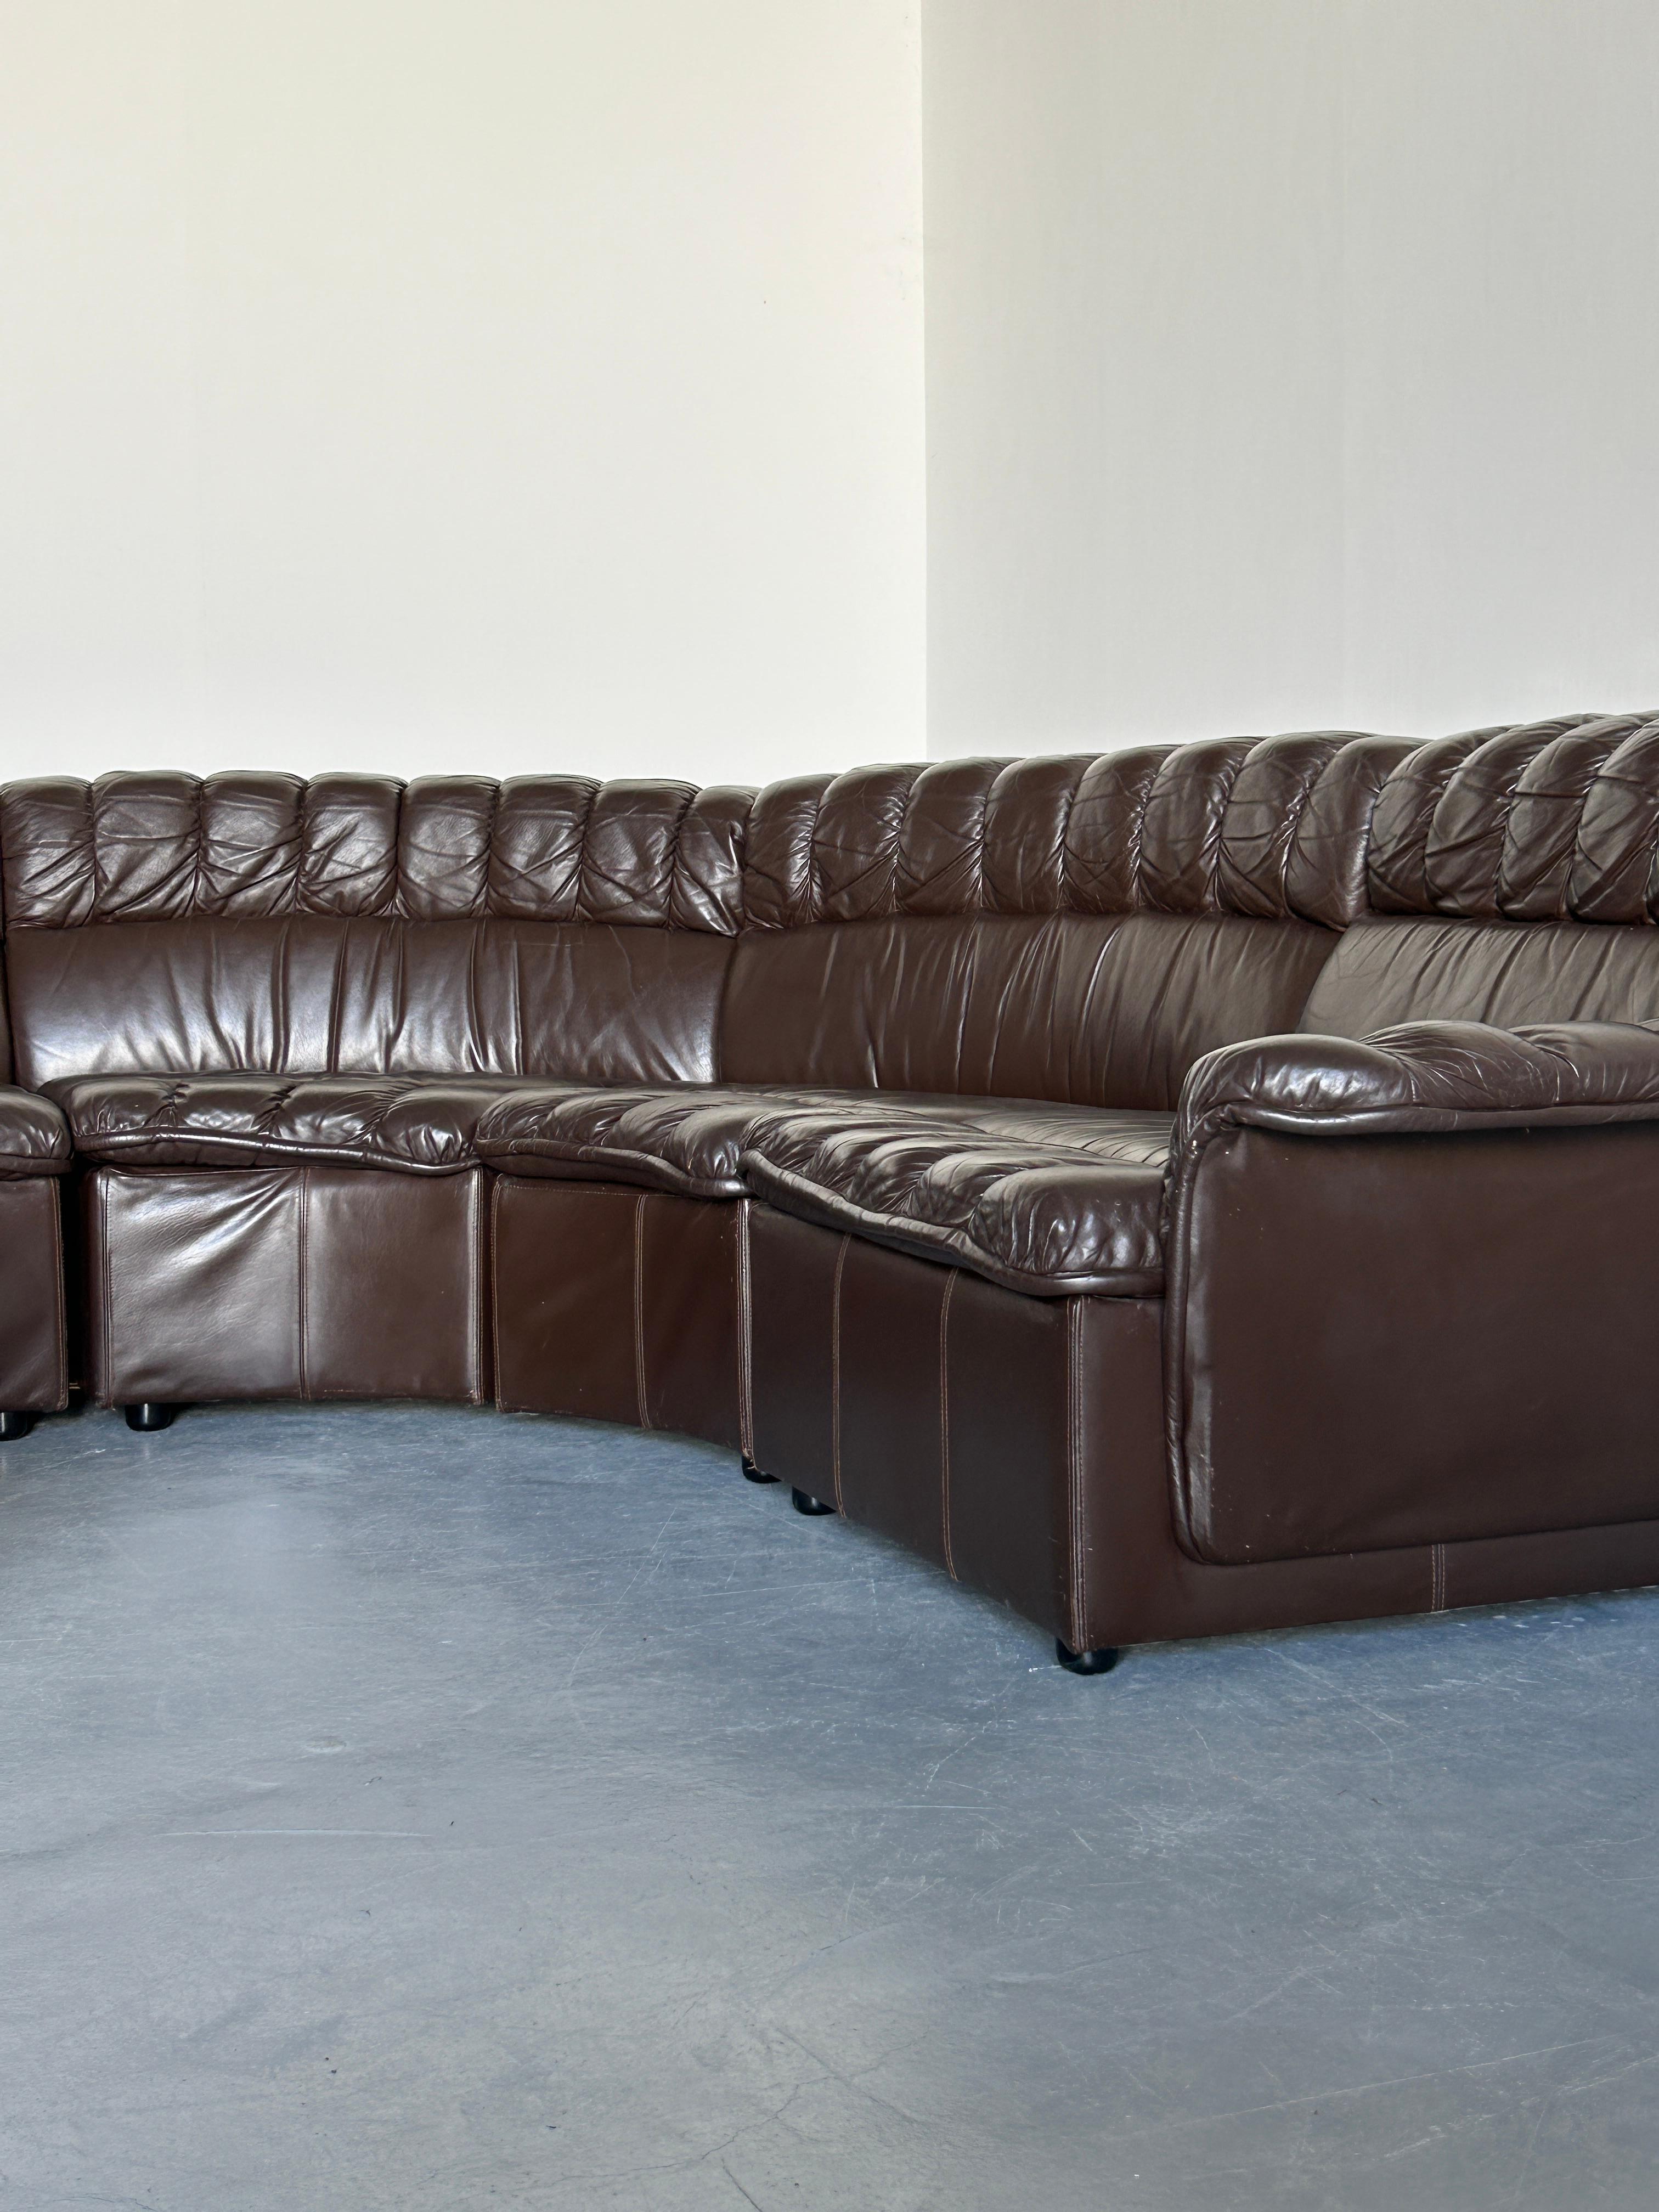 Mid-Century-Modern Leather Snake Sofa in style of De Sede DS-600 Non-Stop, 1970s For Sale 6